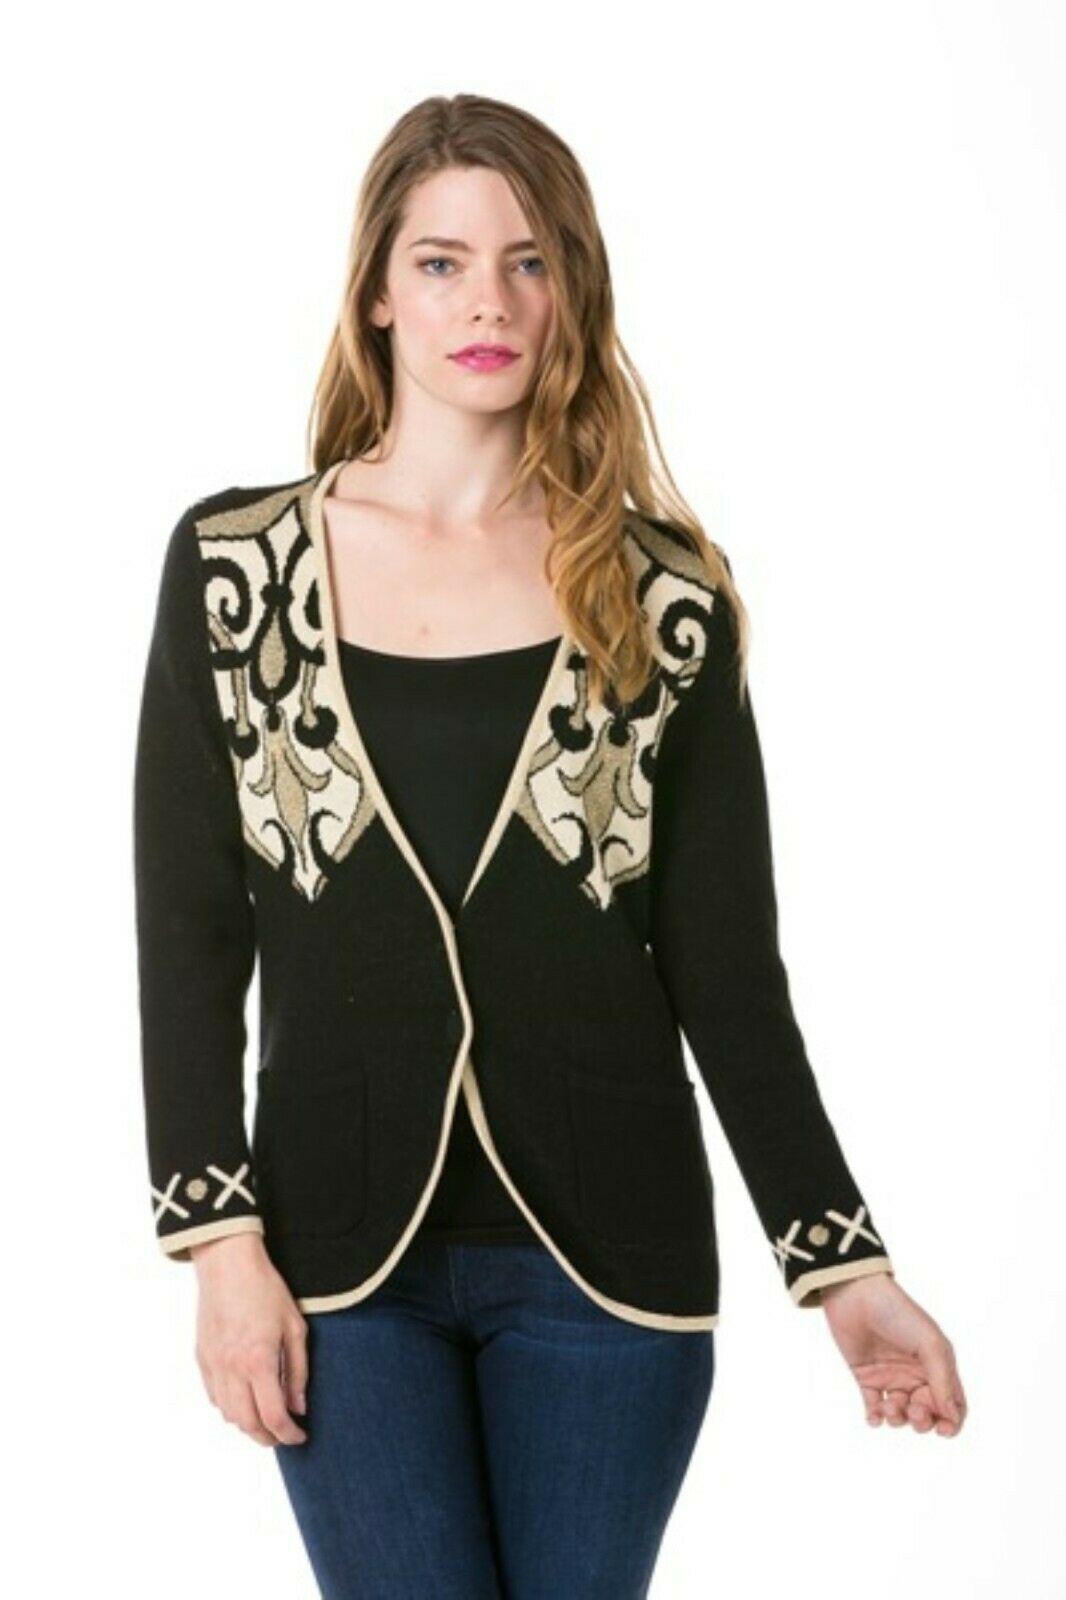 Primary image for Women's Black/Gold Scroll Printed Long Sleeve Cardigan